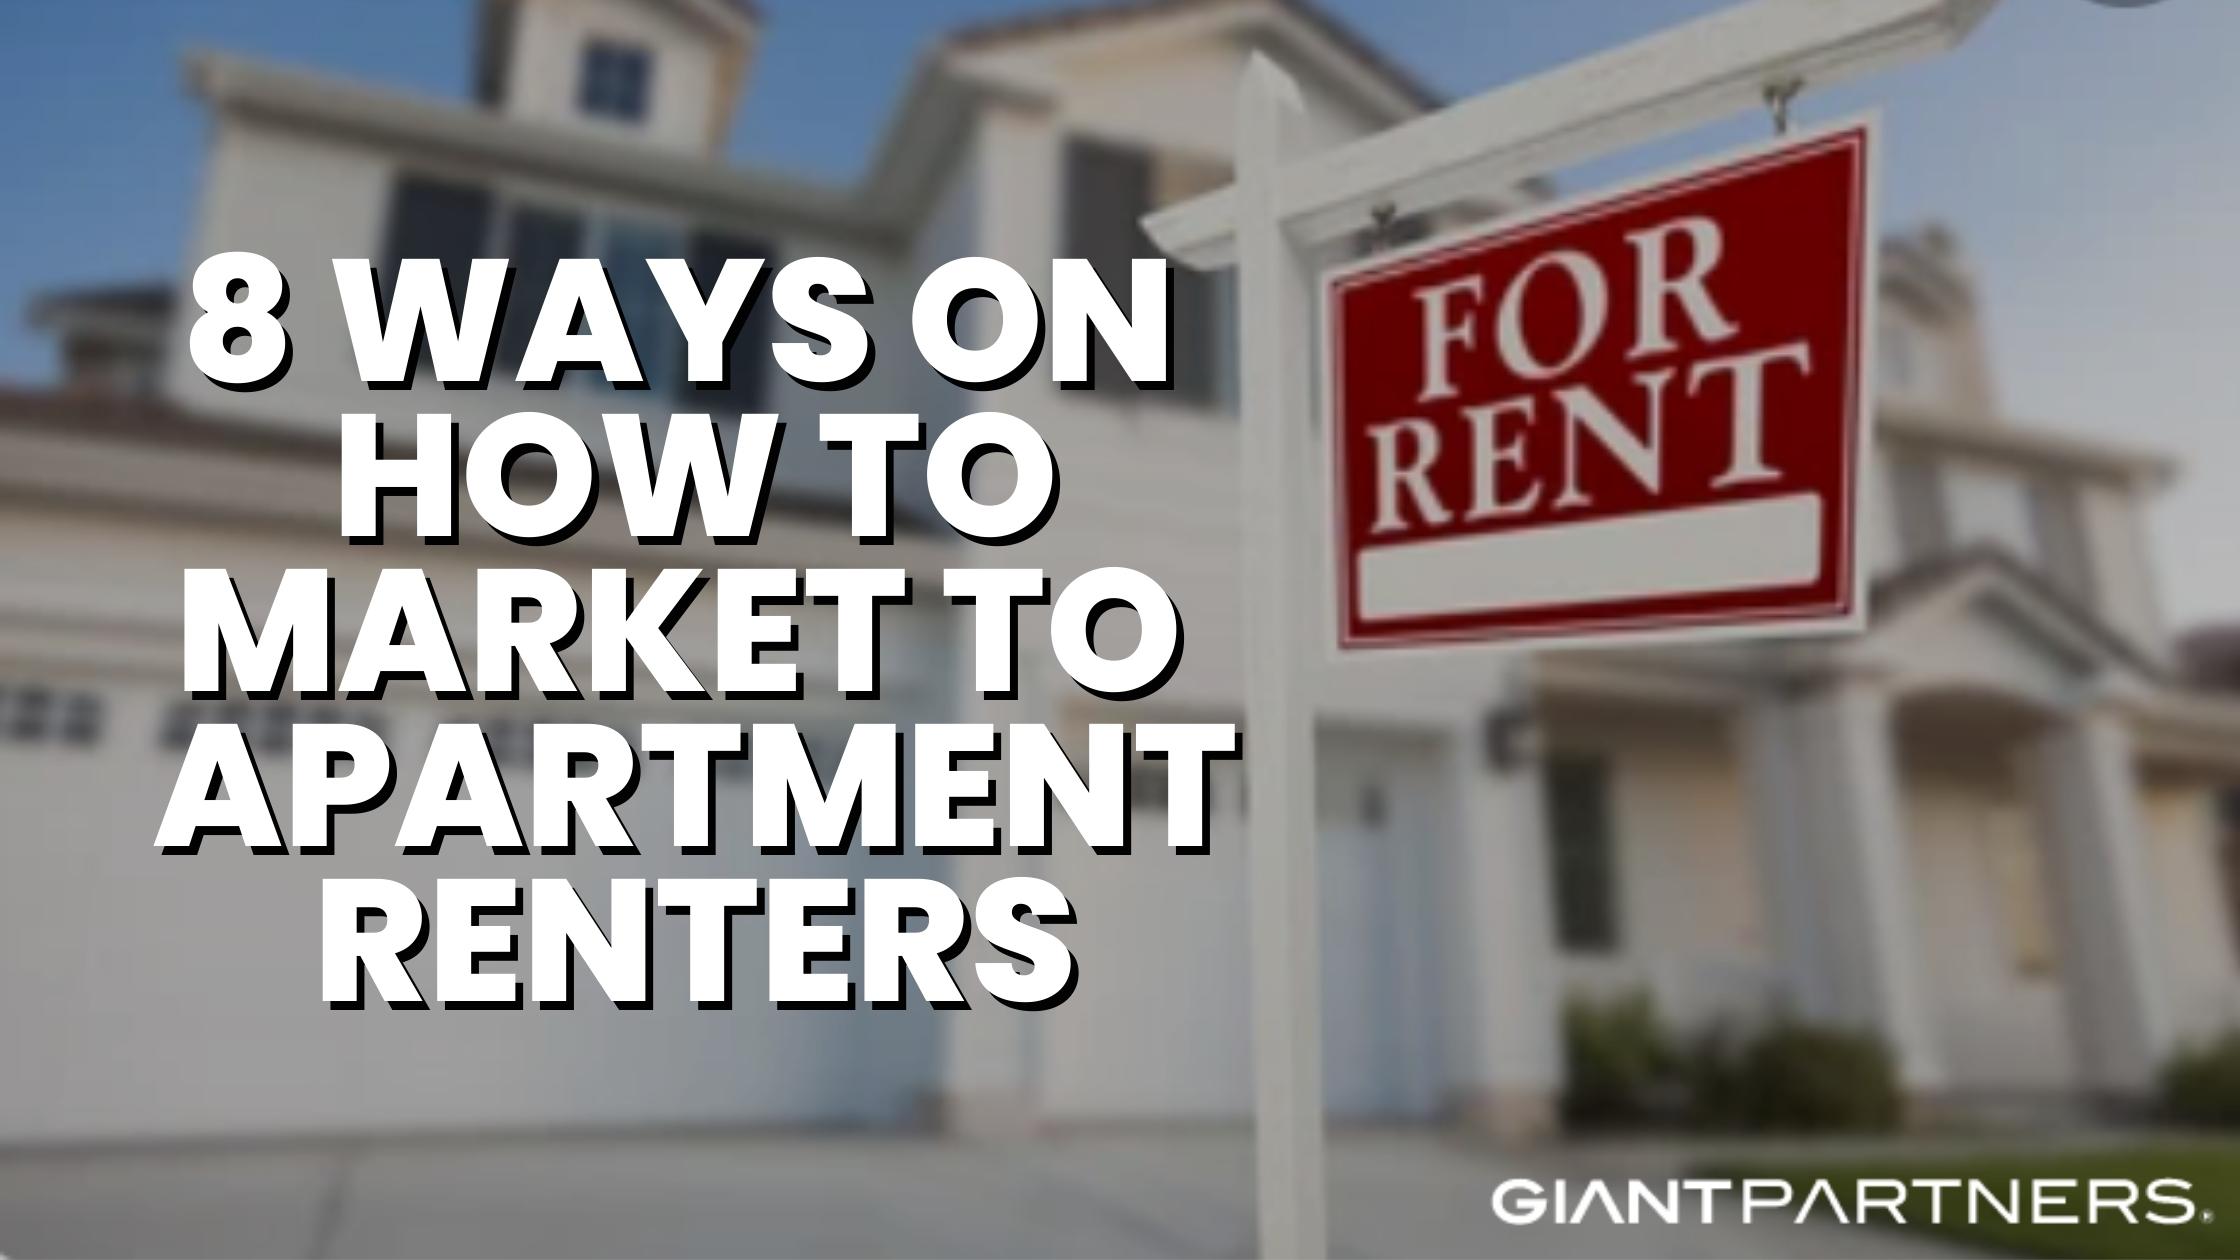 8 Ways On How To Market To Apartment Renters